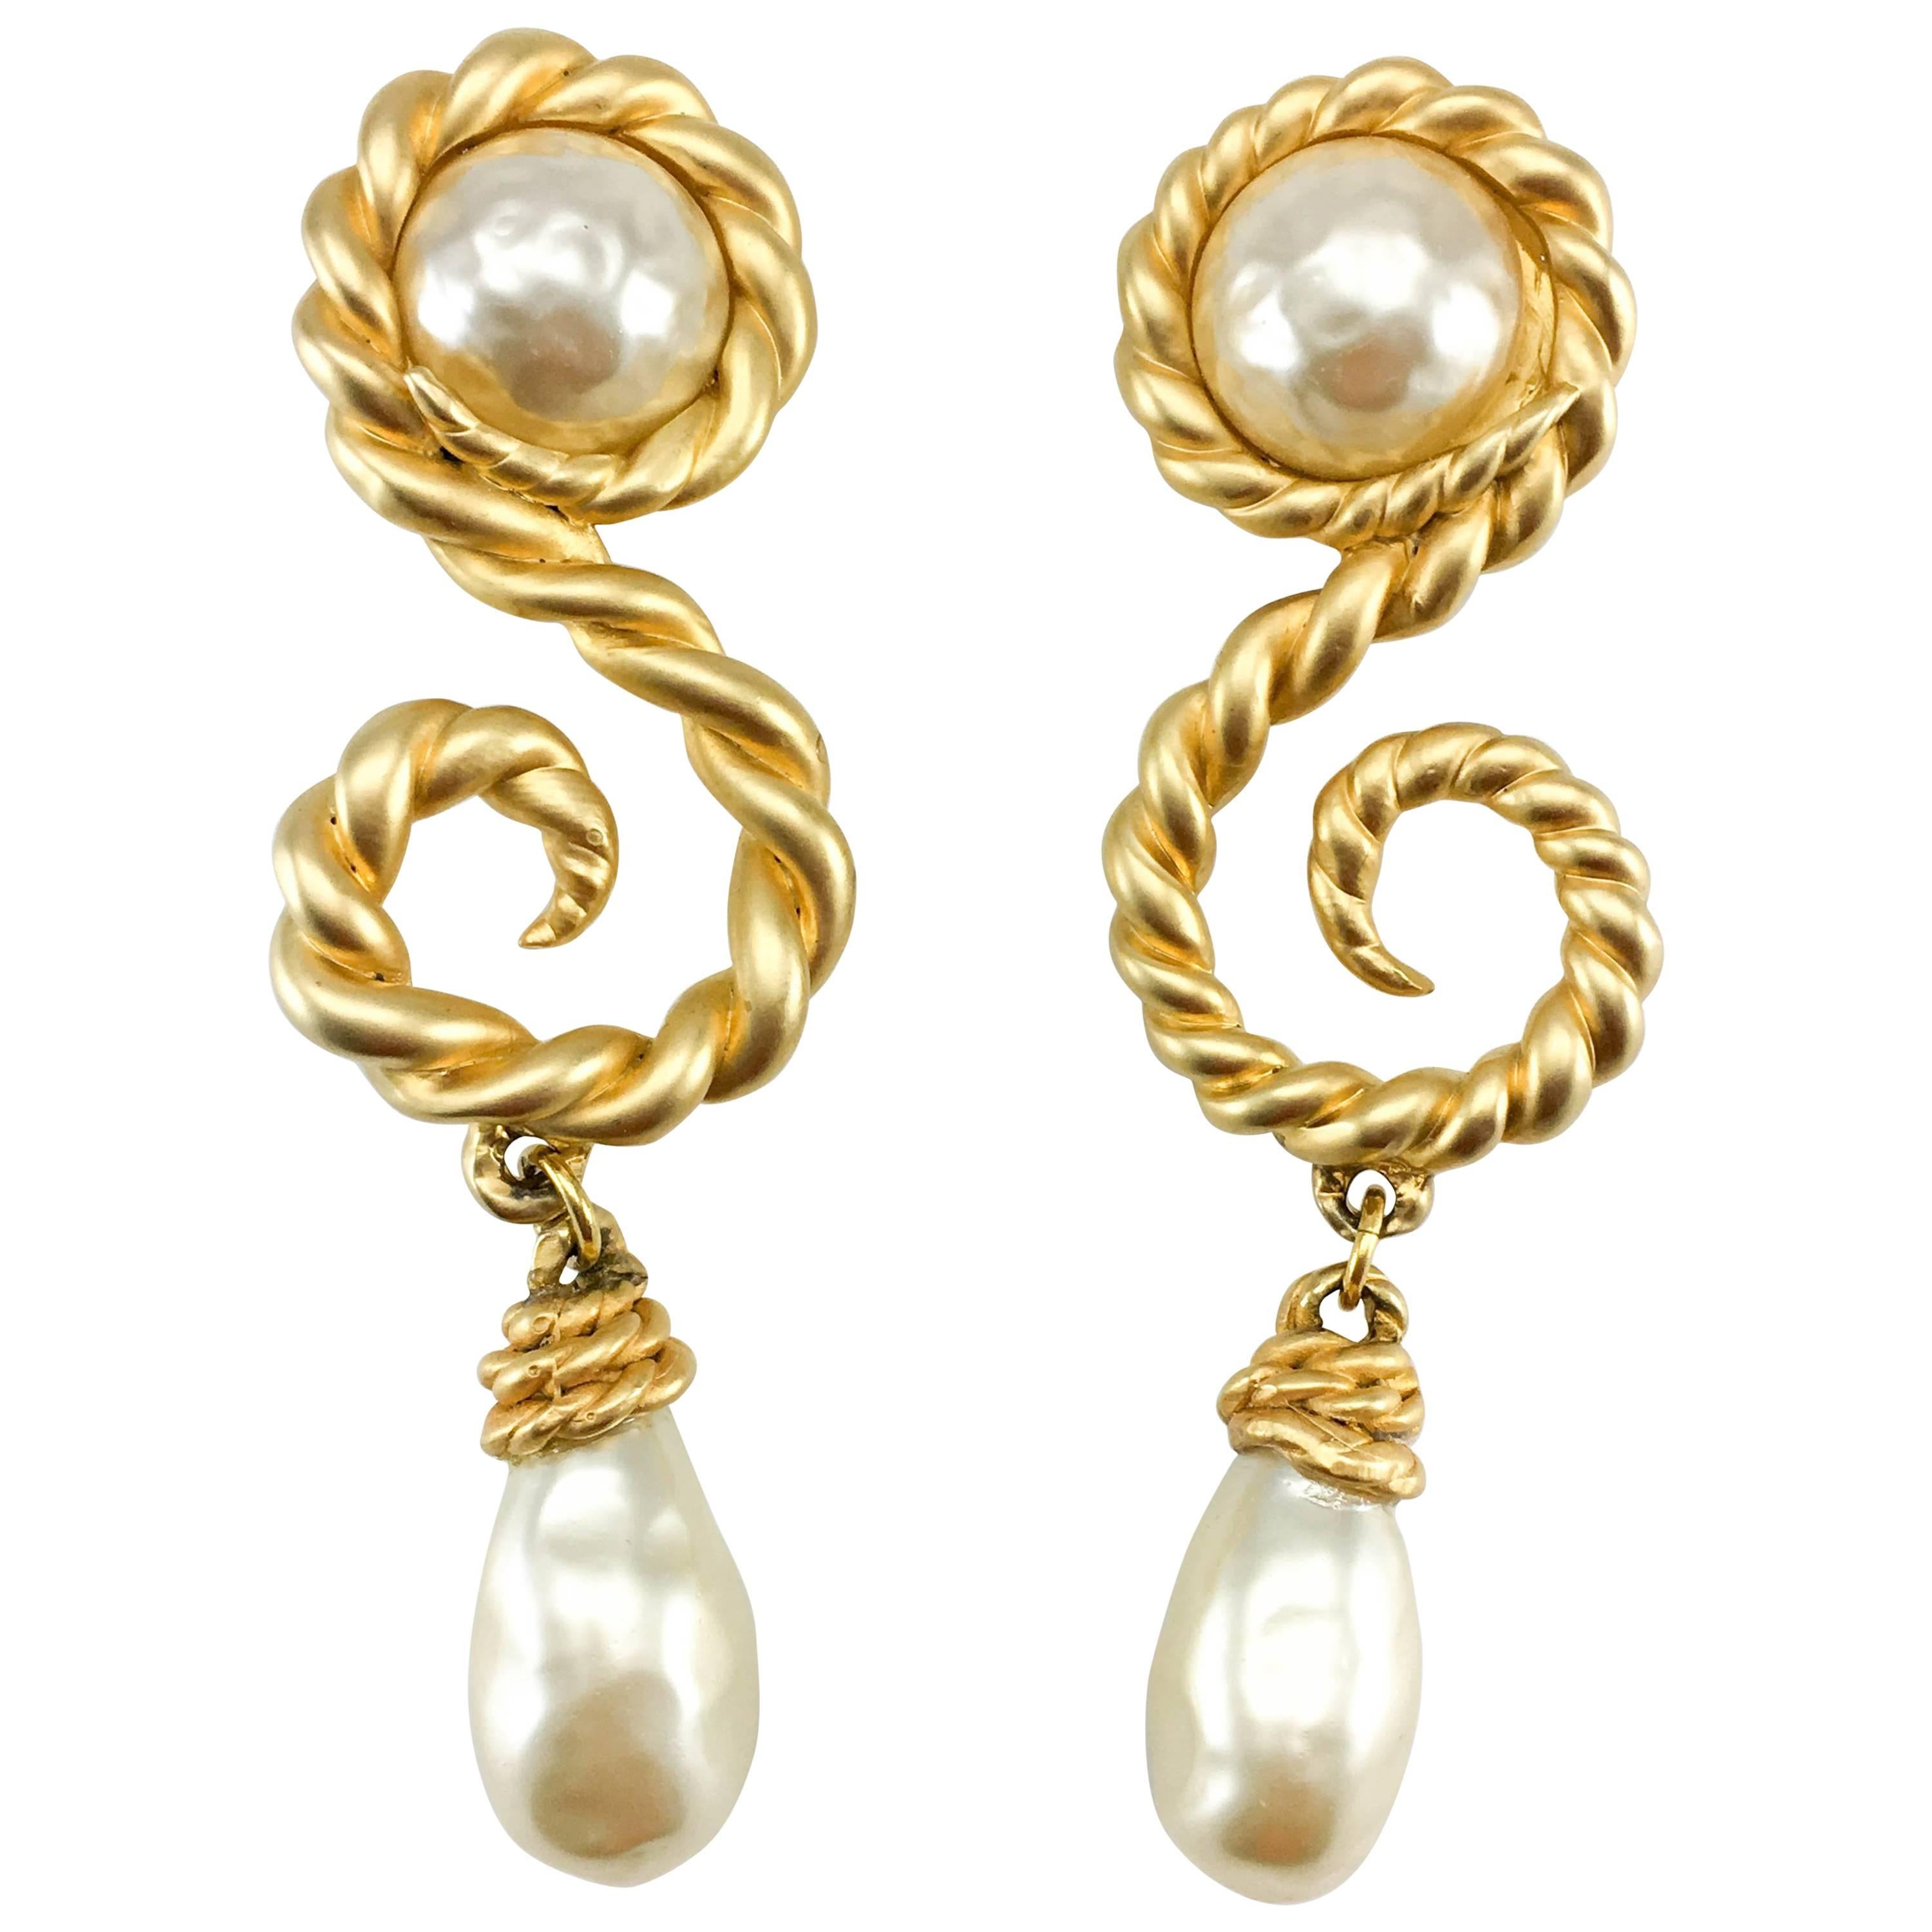 Chanel 1990 Runway Look Massive Arabesque and Baroque Pearl Earrings